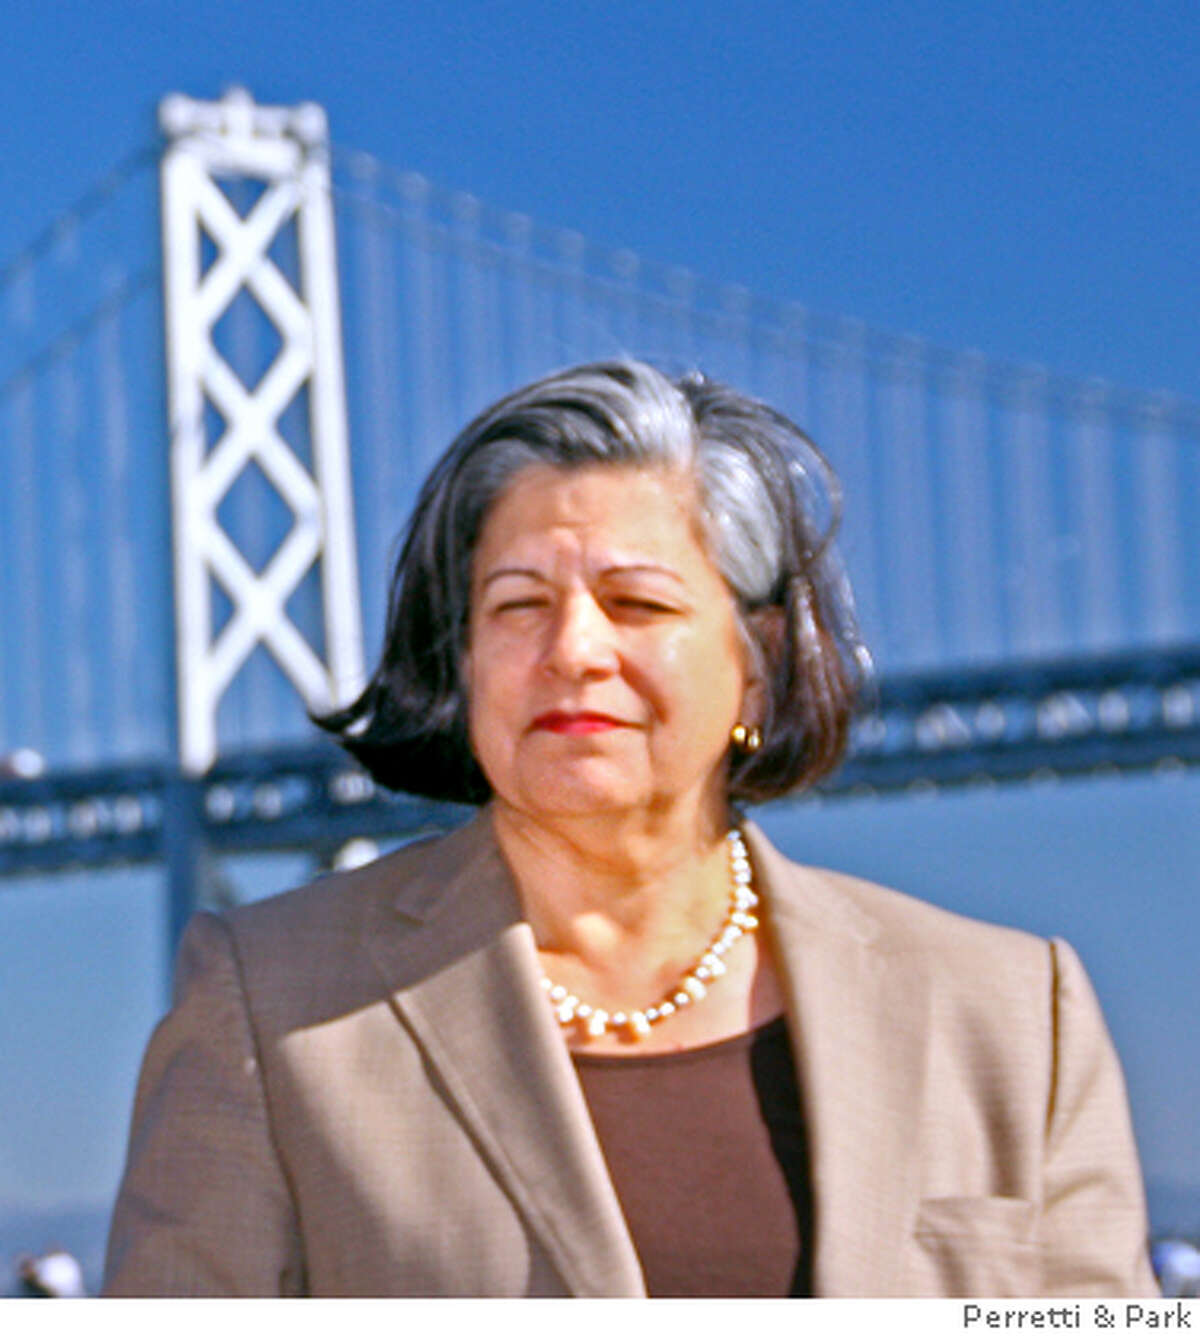 SF PUC chief Susan Leal struck by car outside City Hall